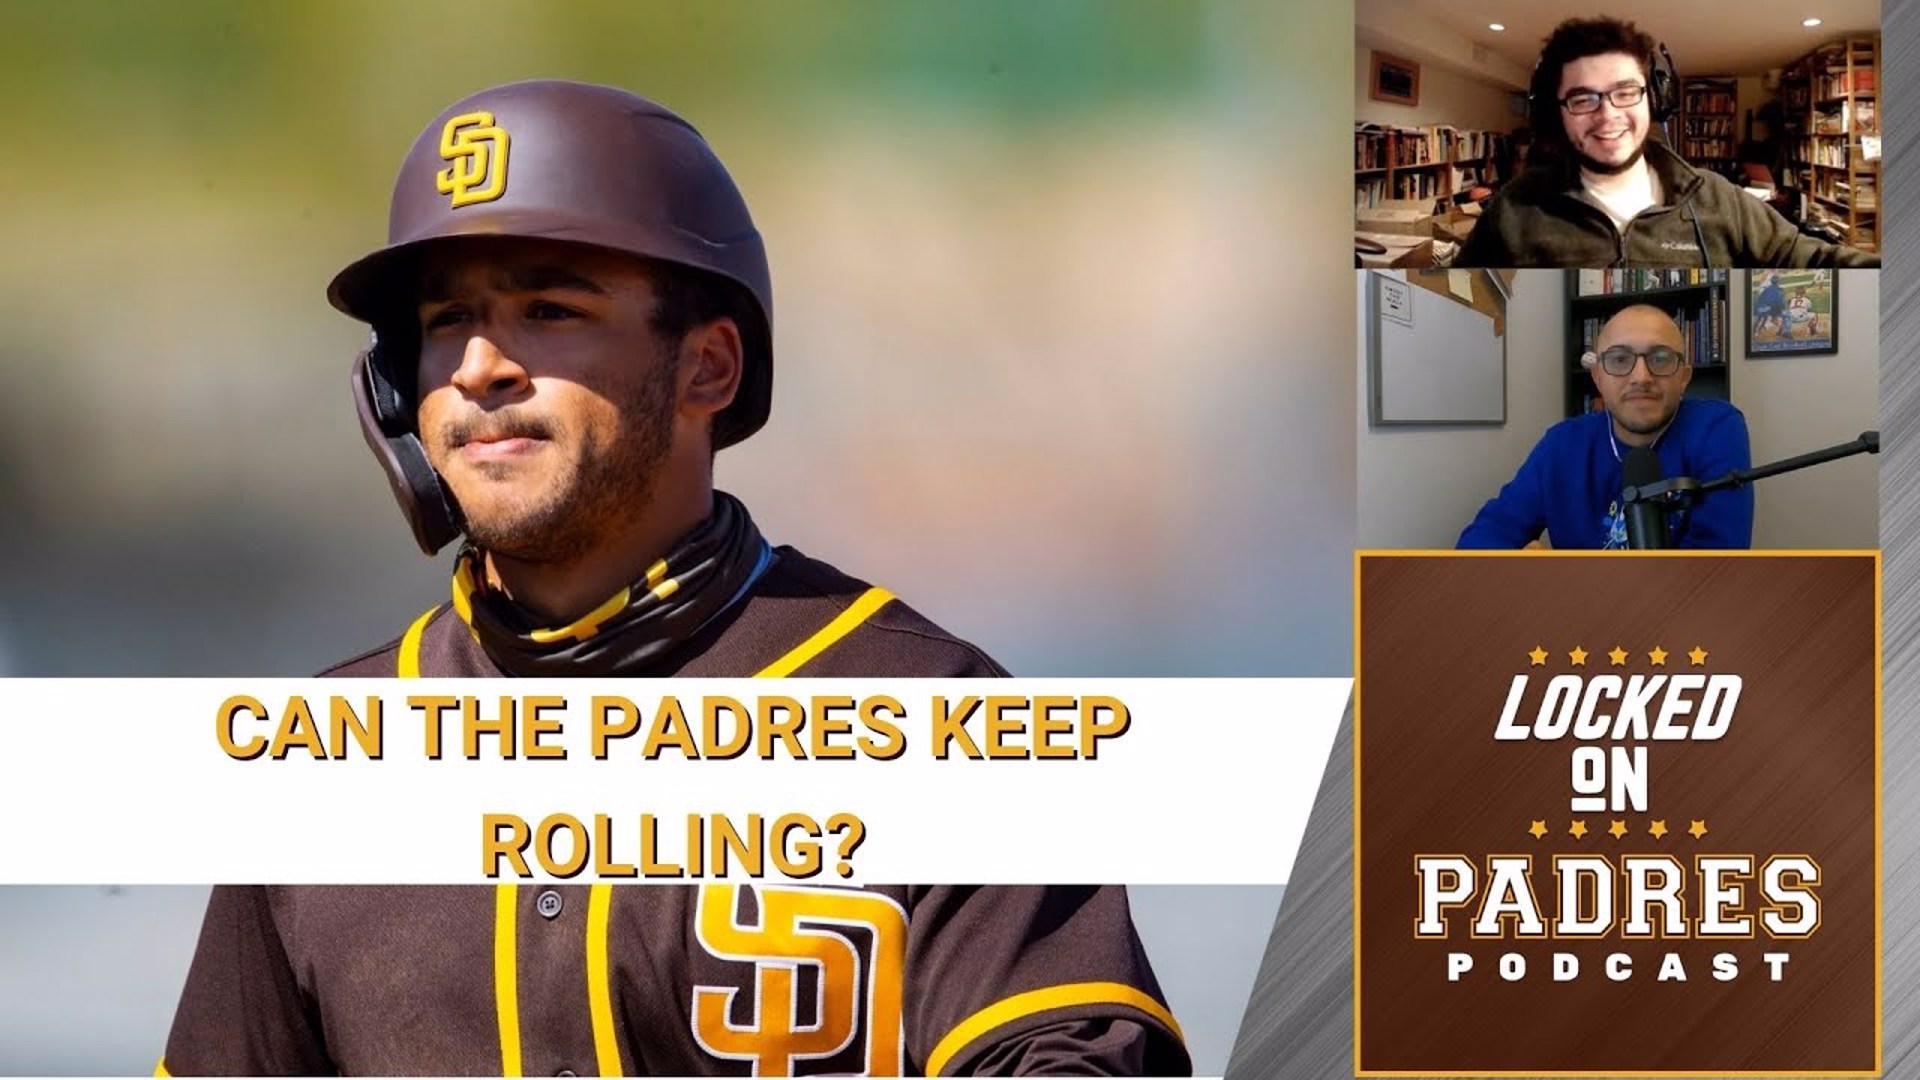 The series is setting up to be a good one with both teams having similar records through May. Javier also examines the trade that saw Trent Grisham become a Padre.